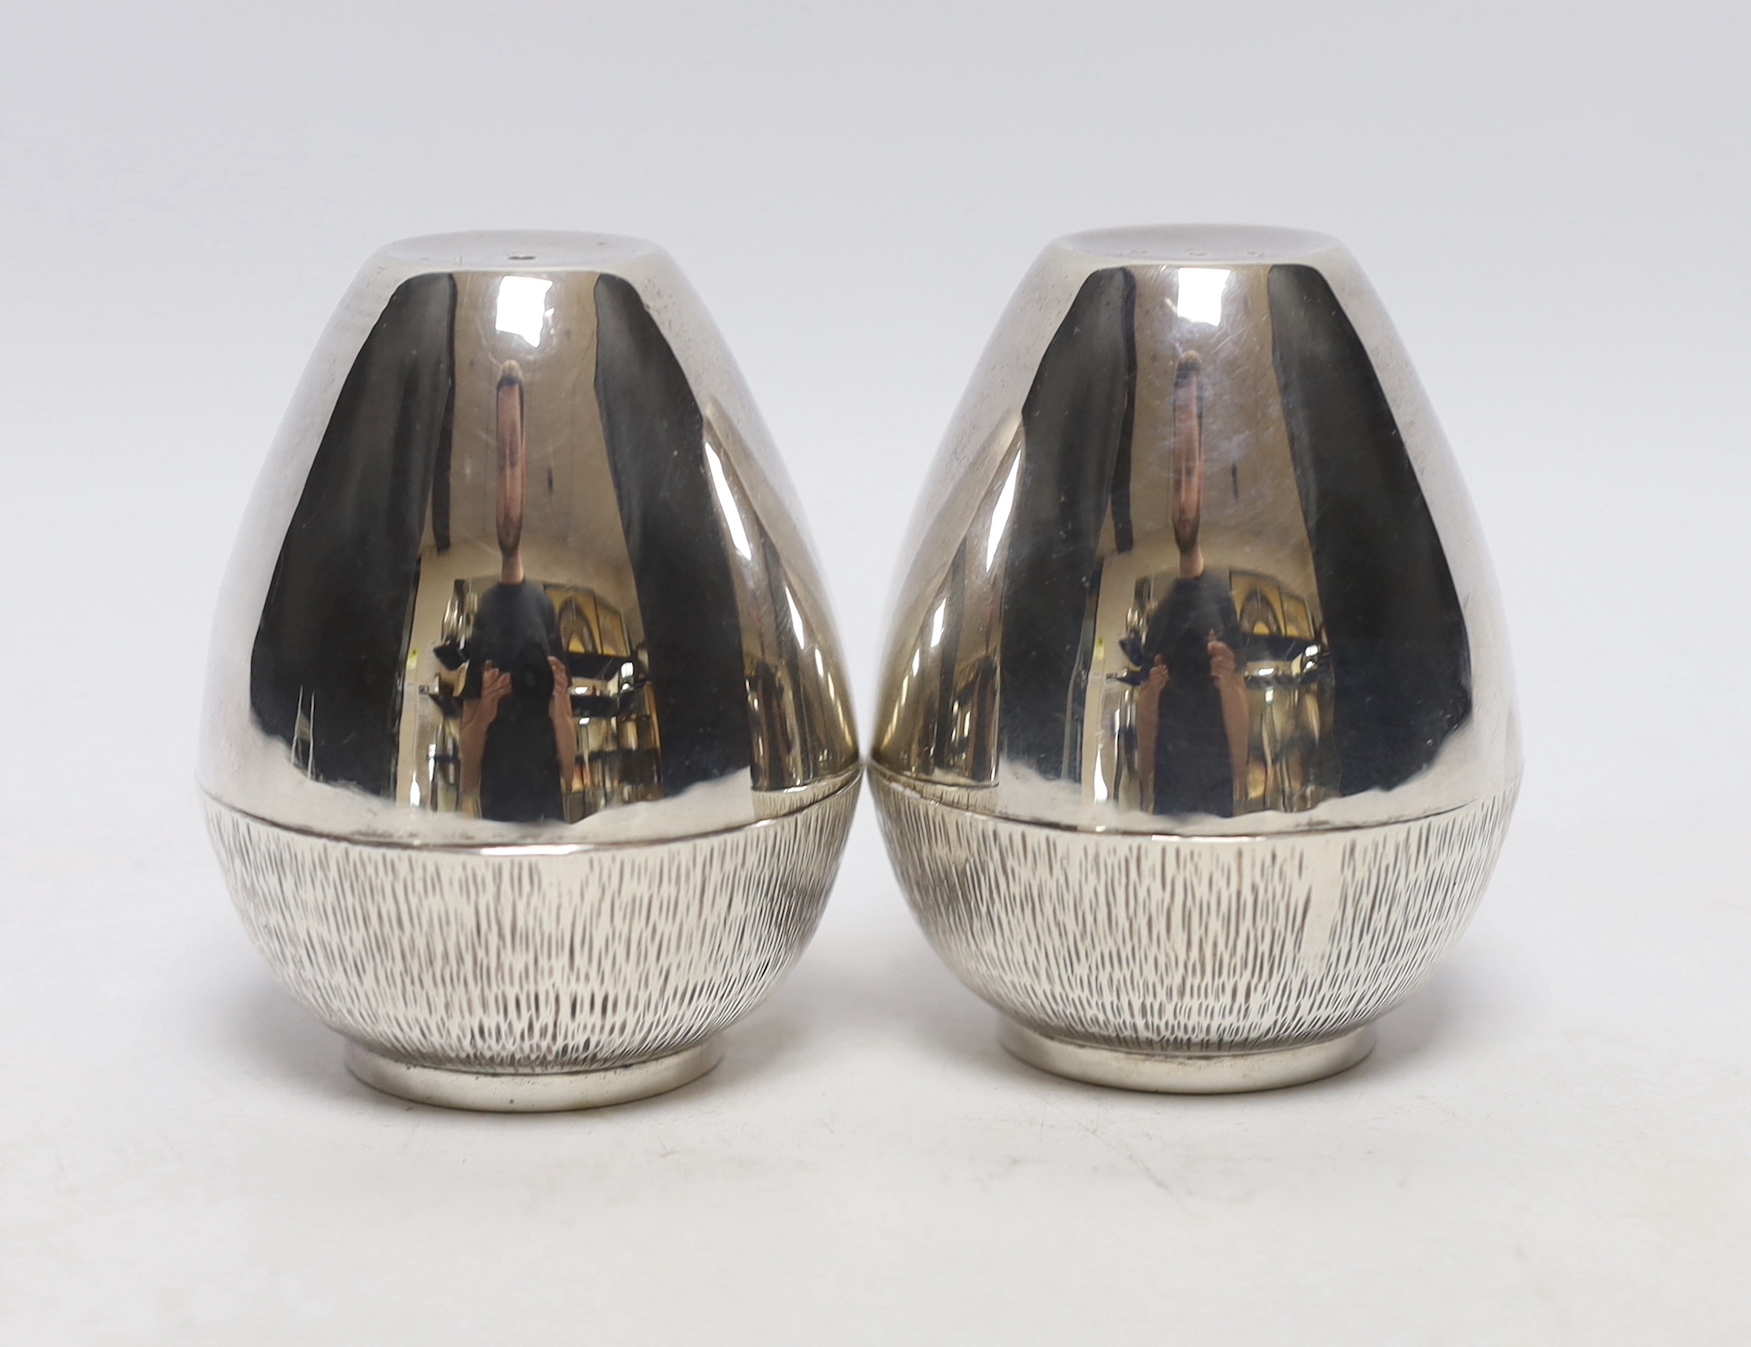 A pair of Elizabeth II part textured silver salt and pepper shakers by Pruden & Smith, Sheffield, 2000, 78mm, gross weight 9.2oz.